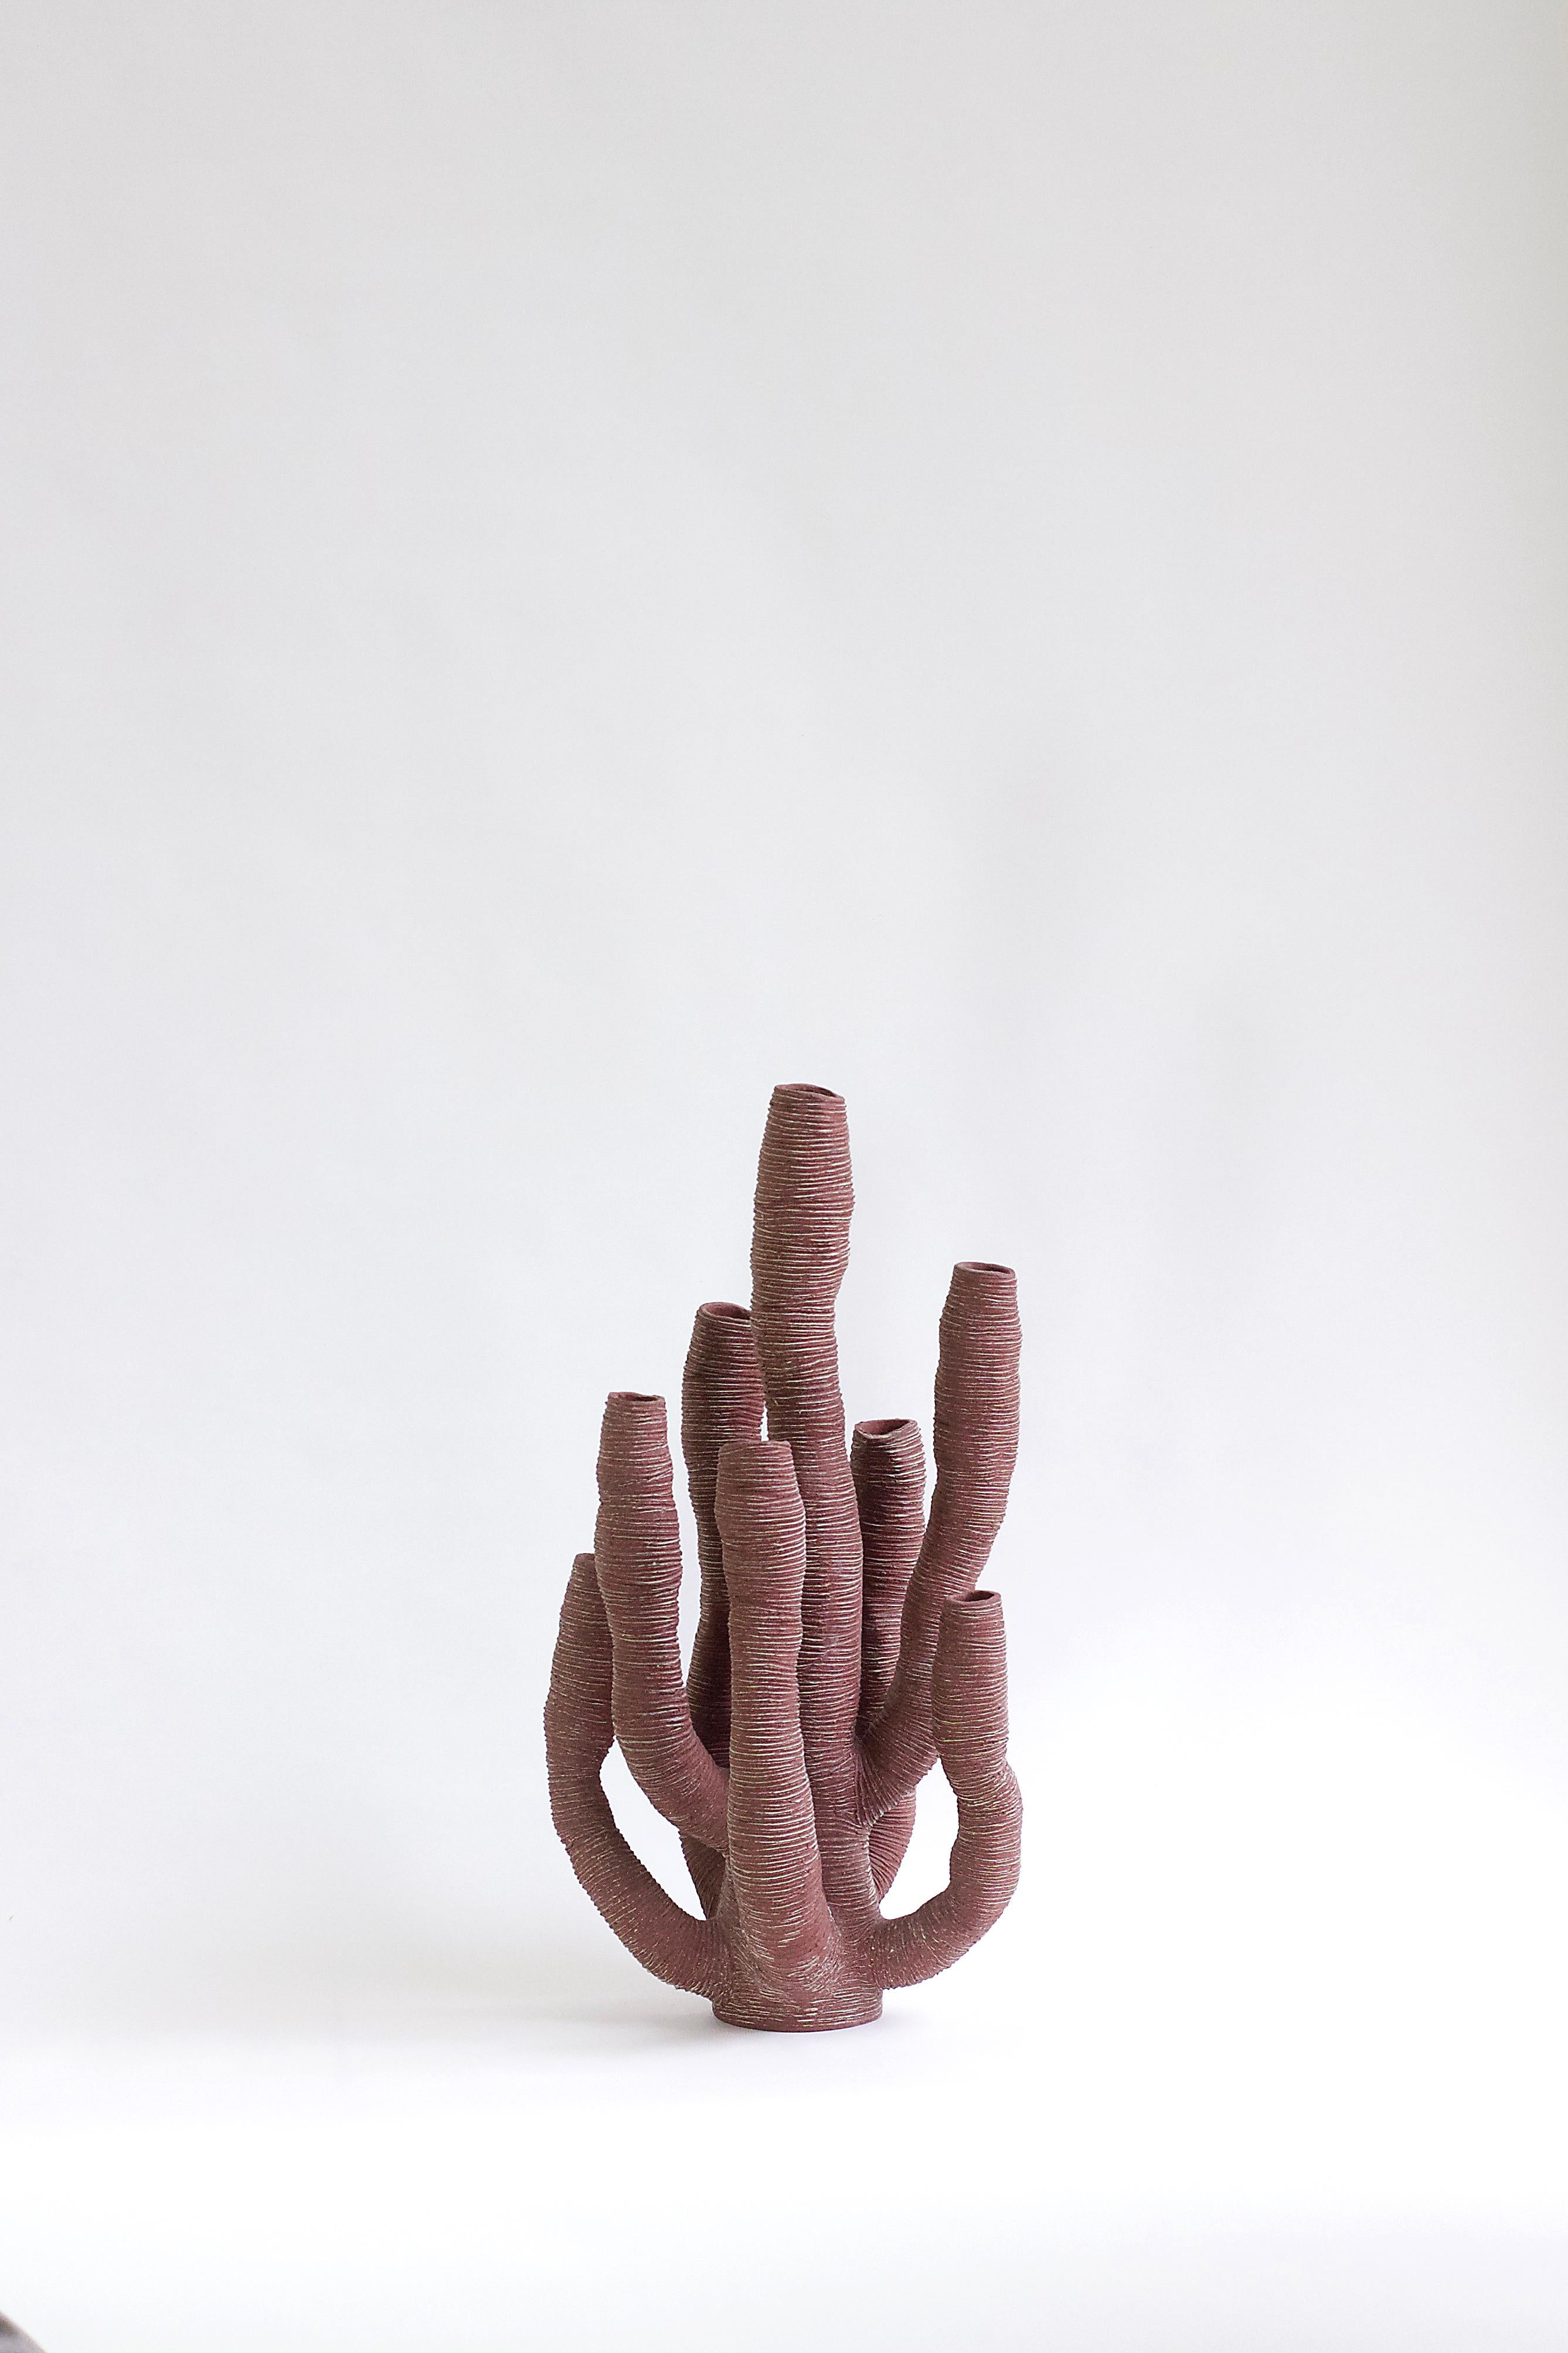 French Contemporary Ceramic Coral Sculpture, Corail Rouge